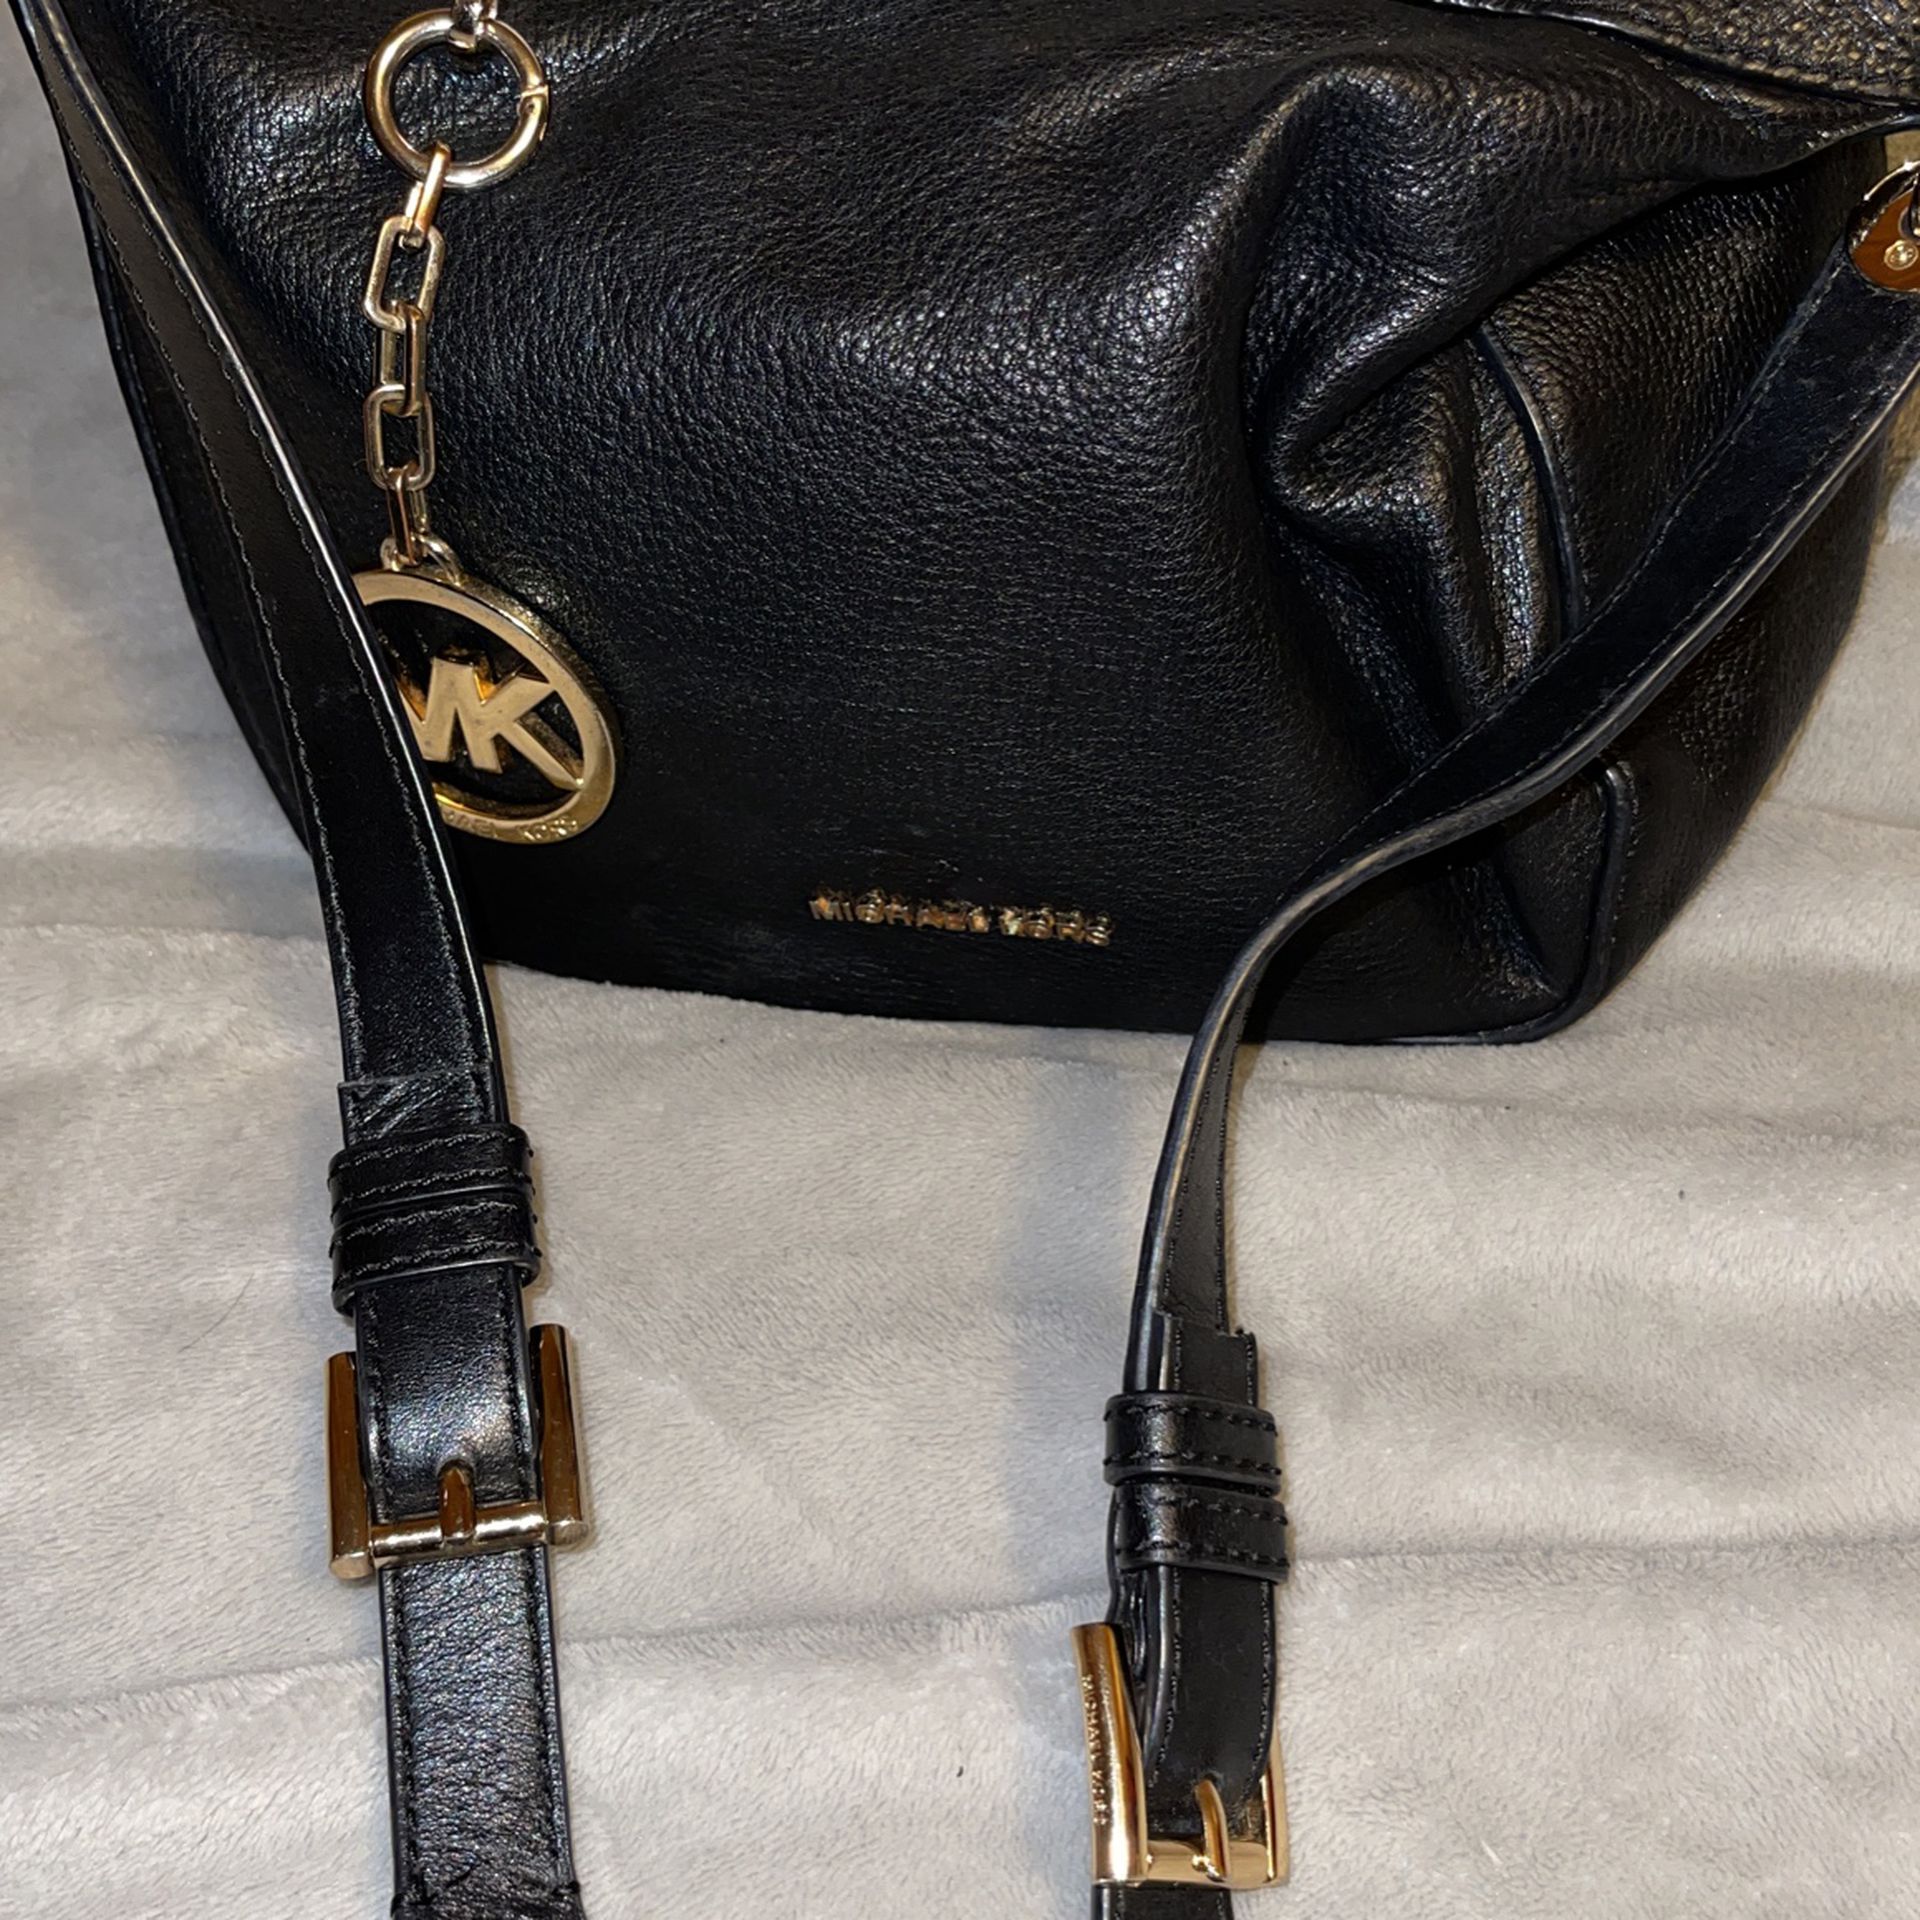 MK Women And Youth Shoulder Purse for Sale in Burlington, WA